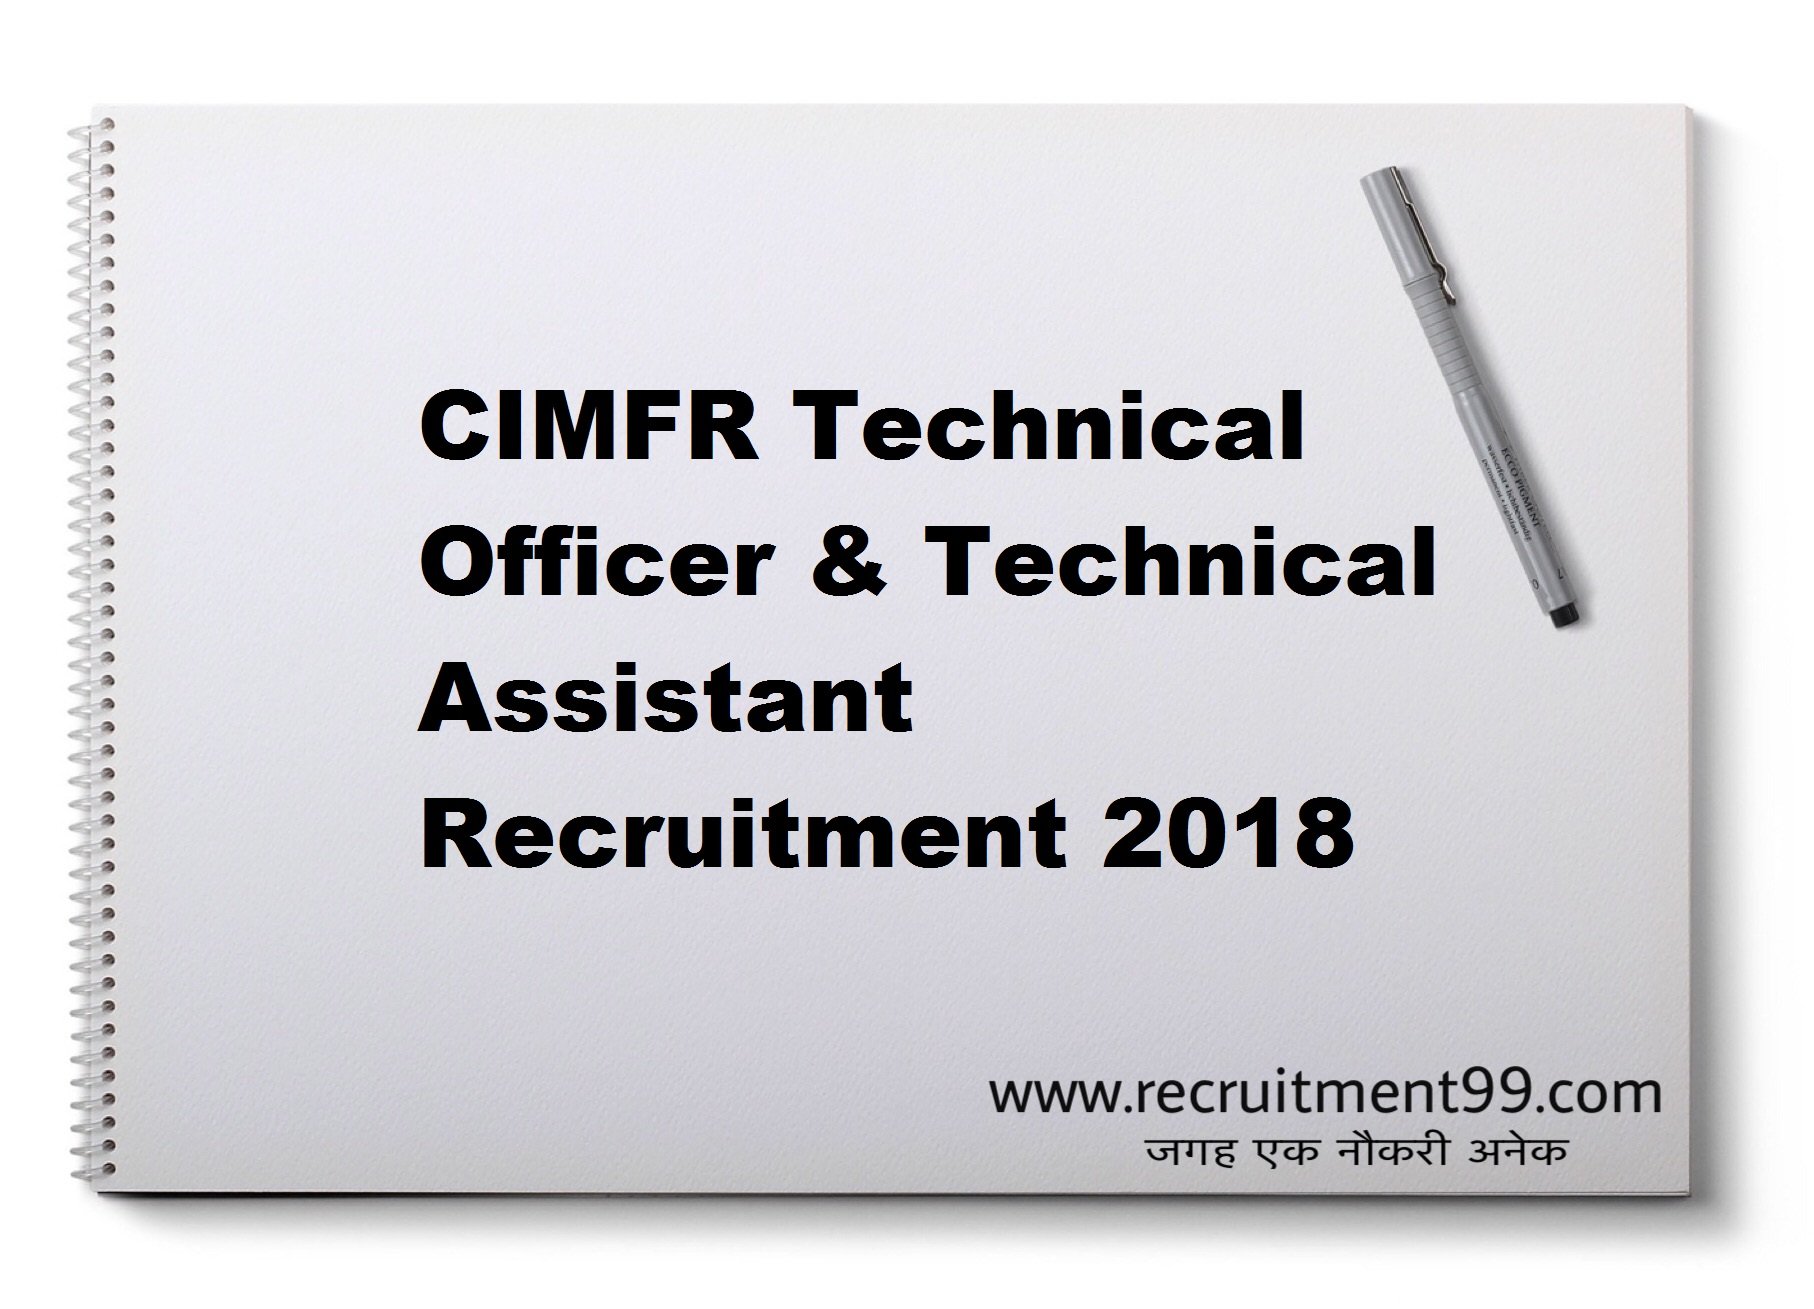 CIMFR Technical Officer & Technical Assistant Recruitment Admit Card Result 2018